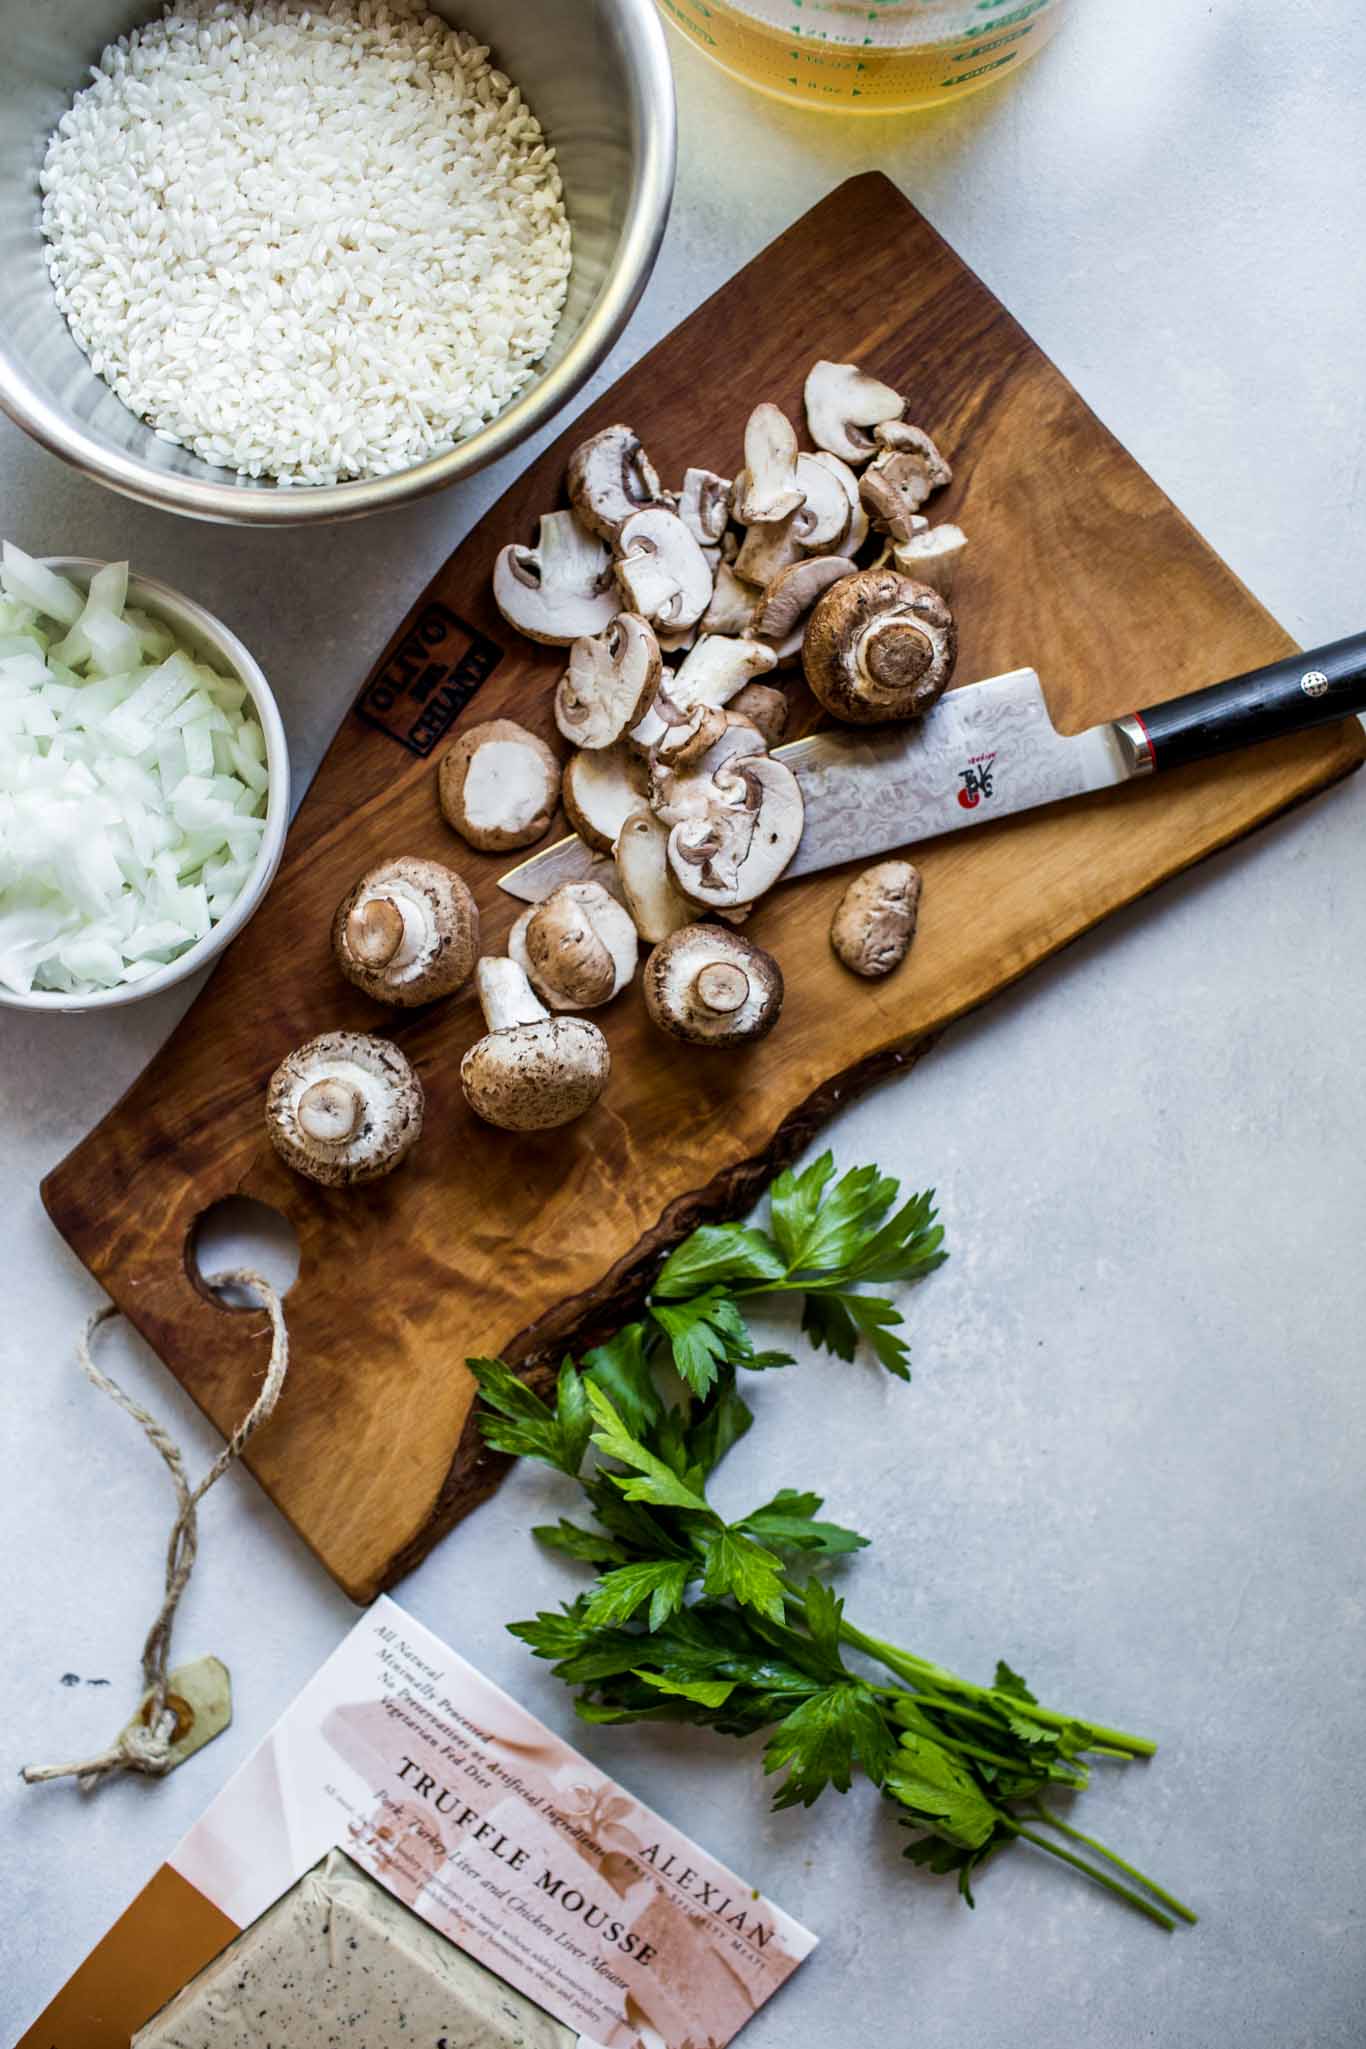 Ingredients for mushroom risotto.